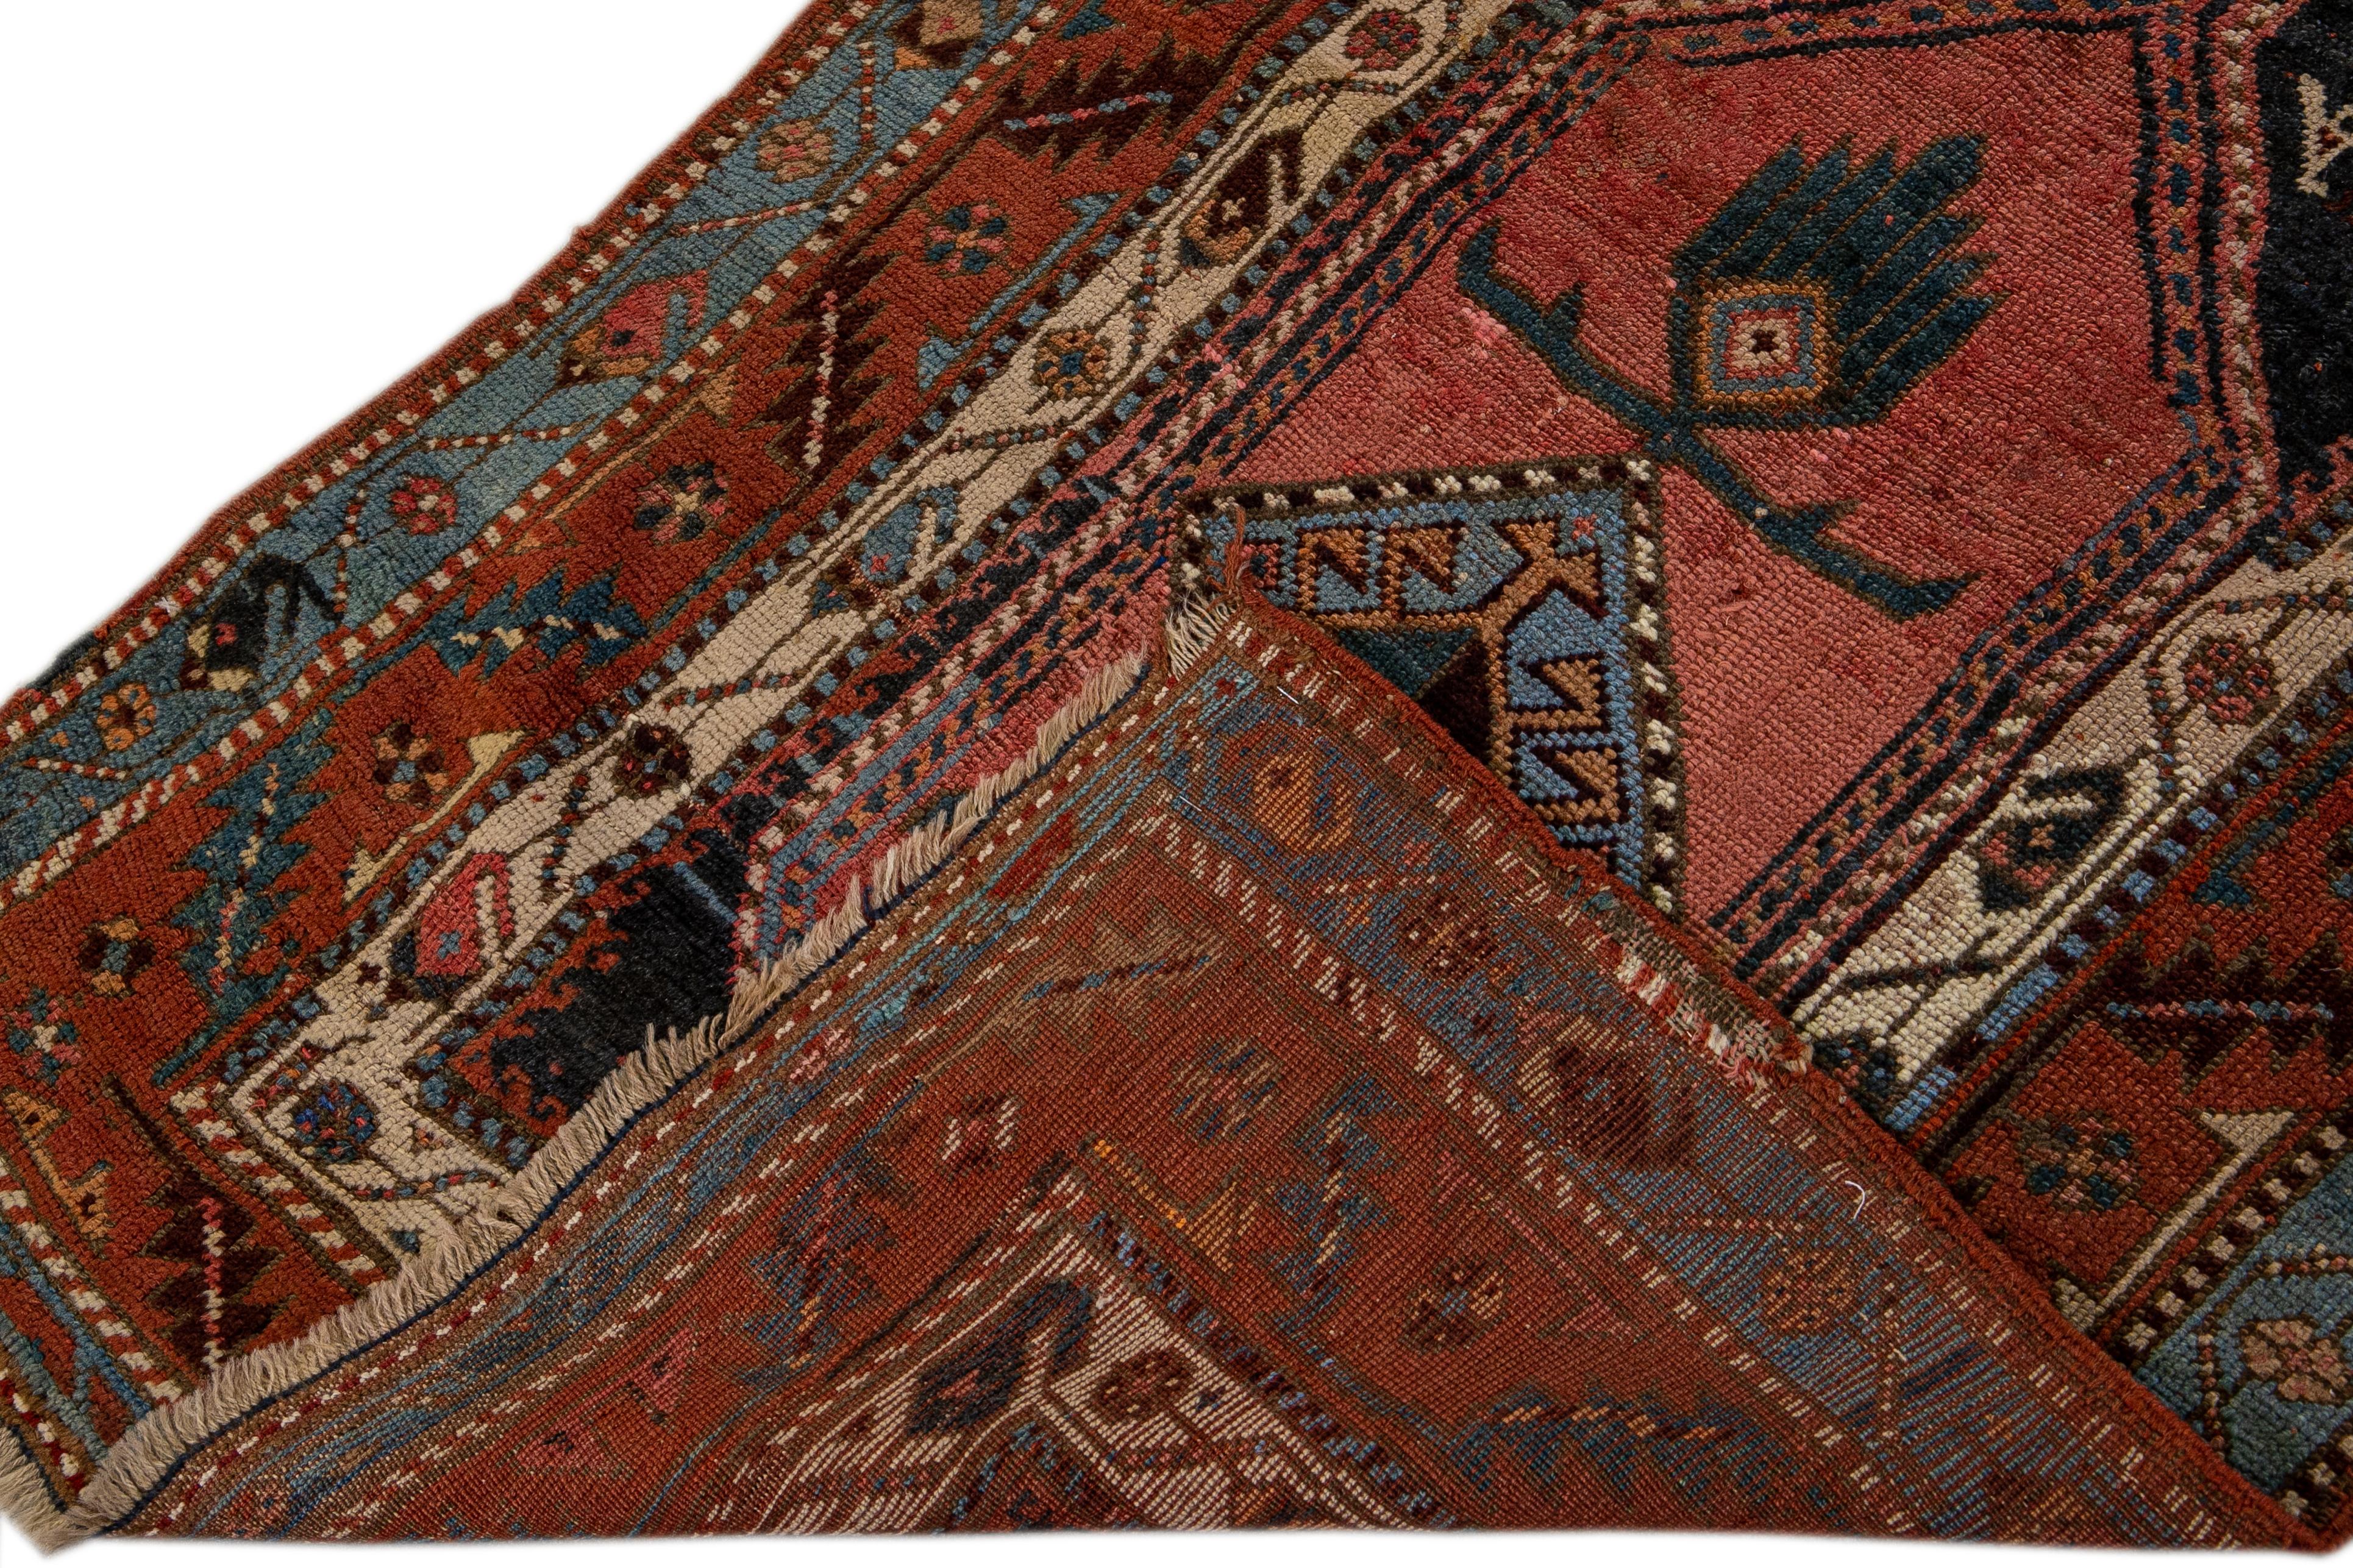 Beautiful Antique Heriz hand-knotted wool rug with the blue field. This Persian rug has a rusted frame and multicolor accents in all over geometric tribal design.

This rug measures: 3'2